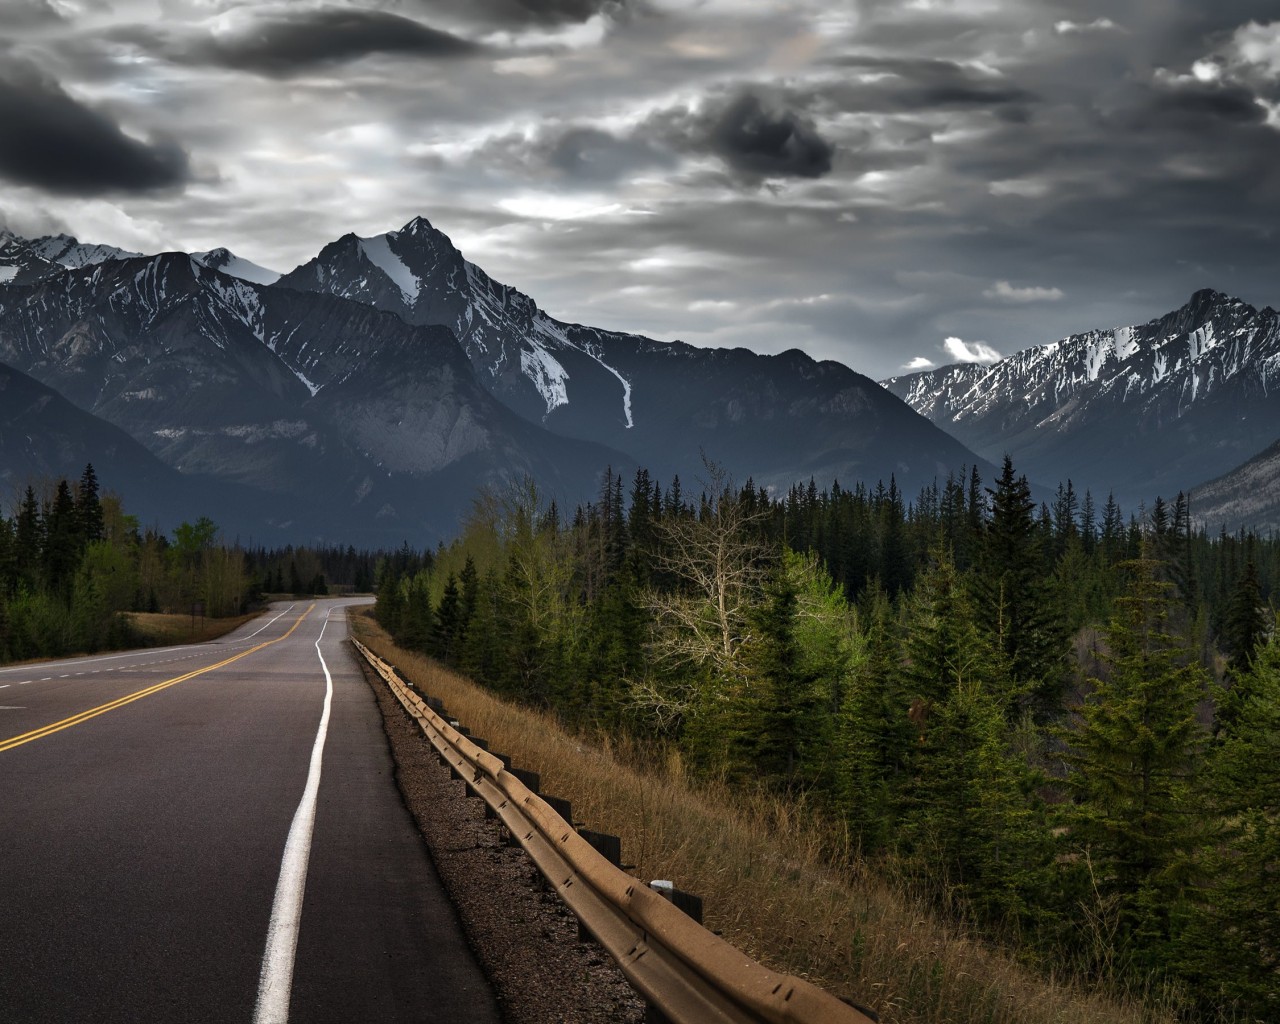 Road trip on a stormy day, Canada Wallpaper for Desktop 1280x1024